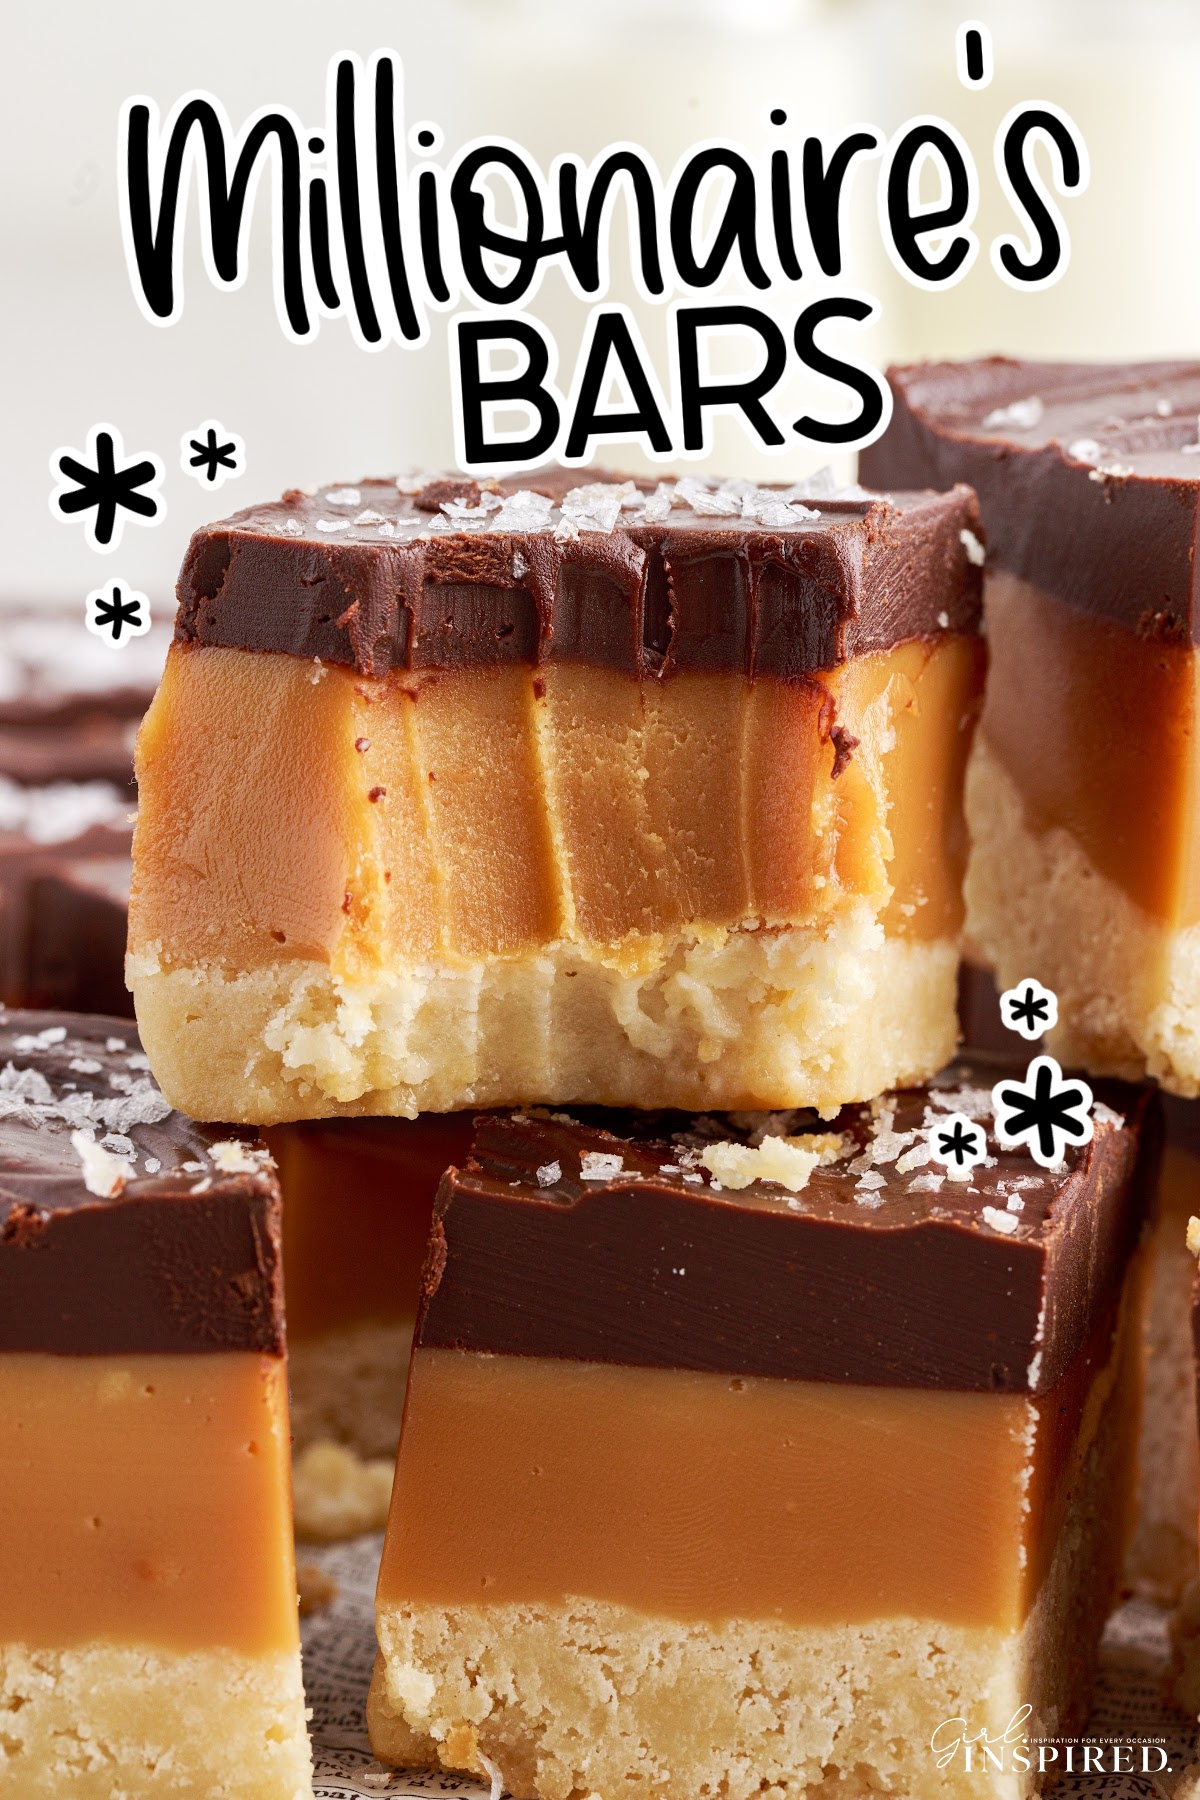 Millionaire Bars stacked on each other with a bite taken from the top one with text overlay.